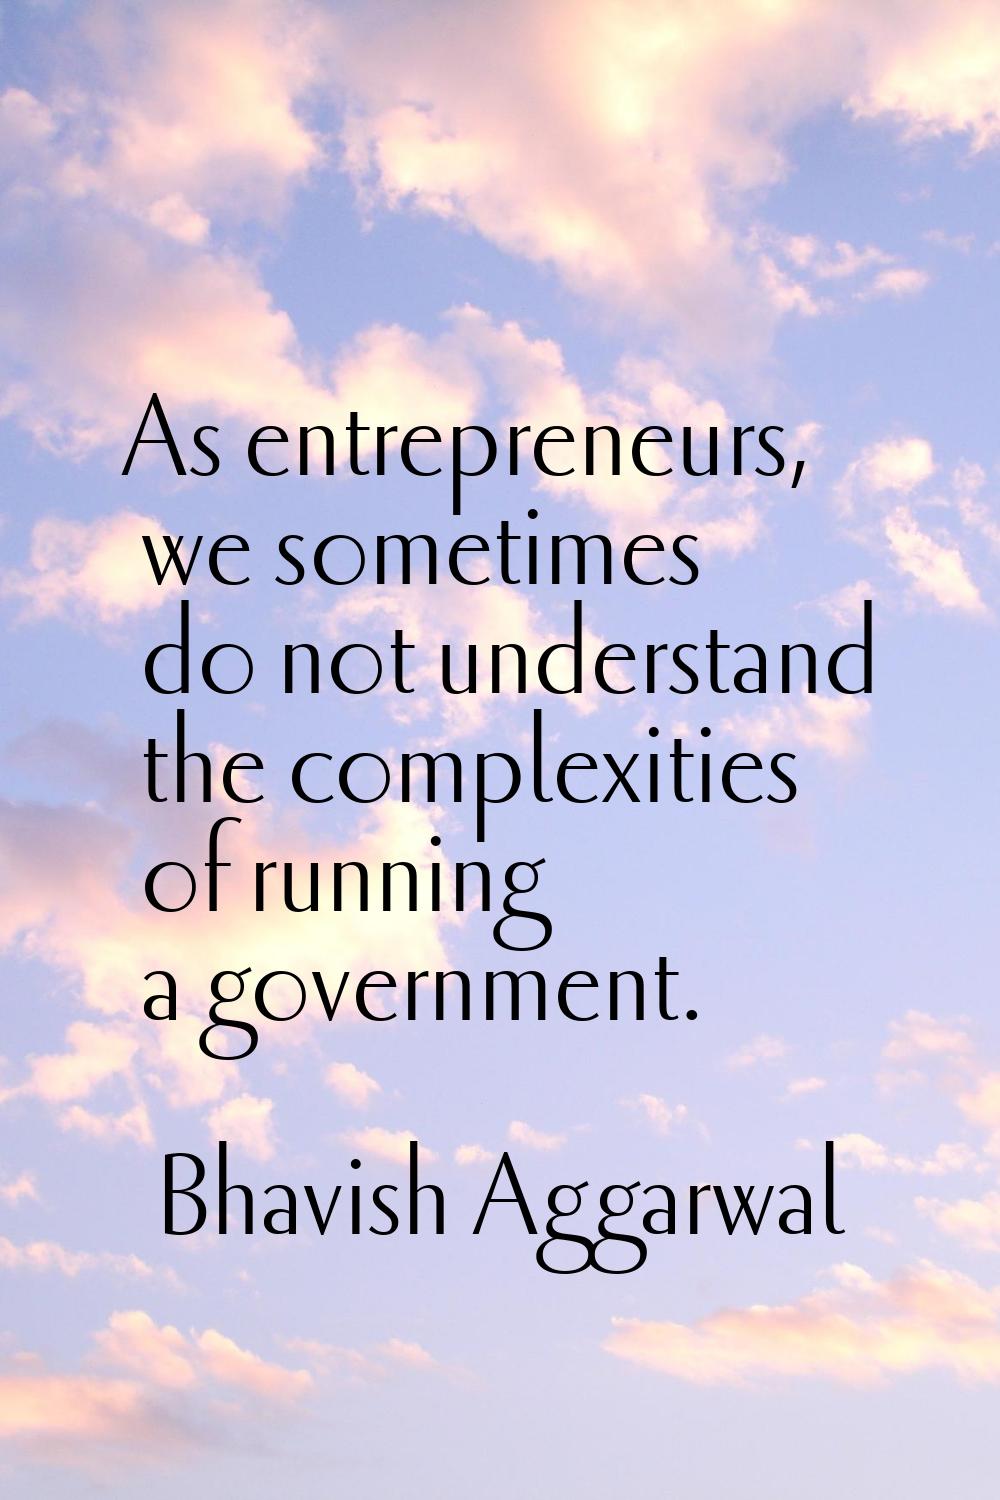 As entrepreneurs, we sometimes do not understand the complexities of running a government.